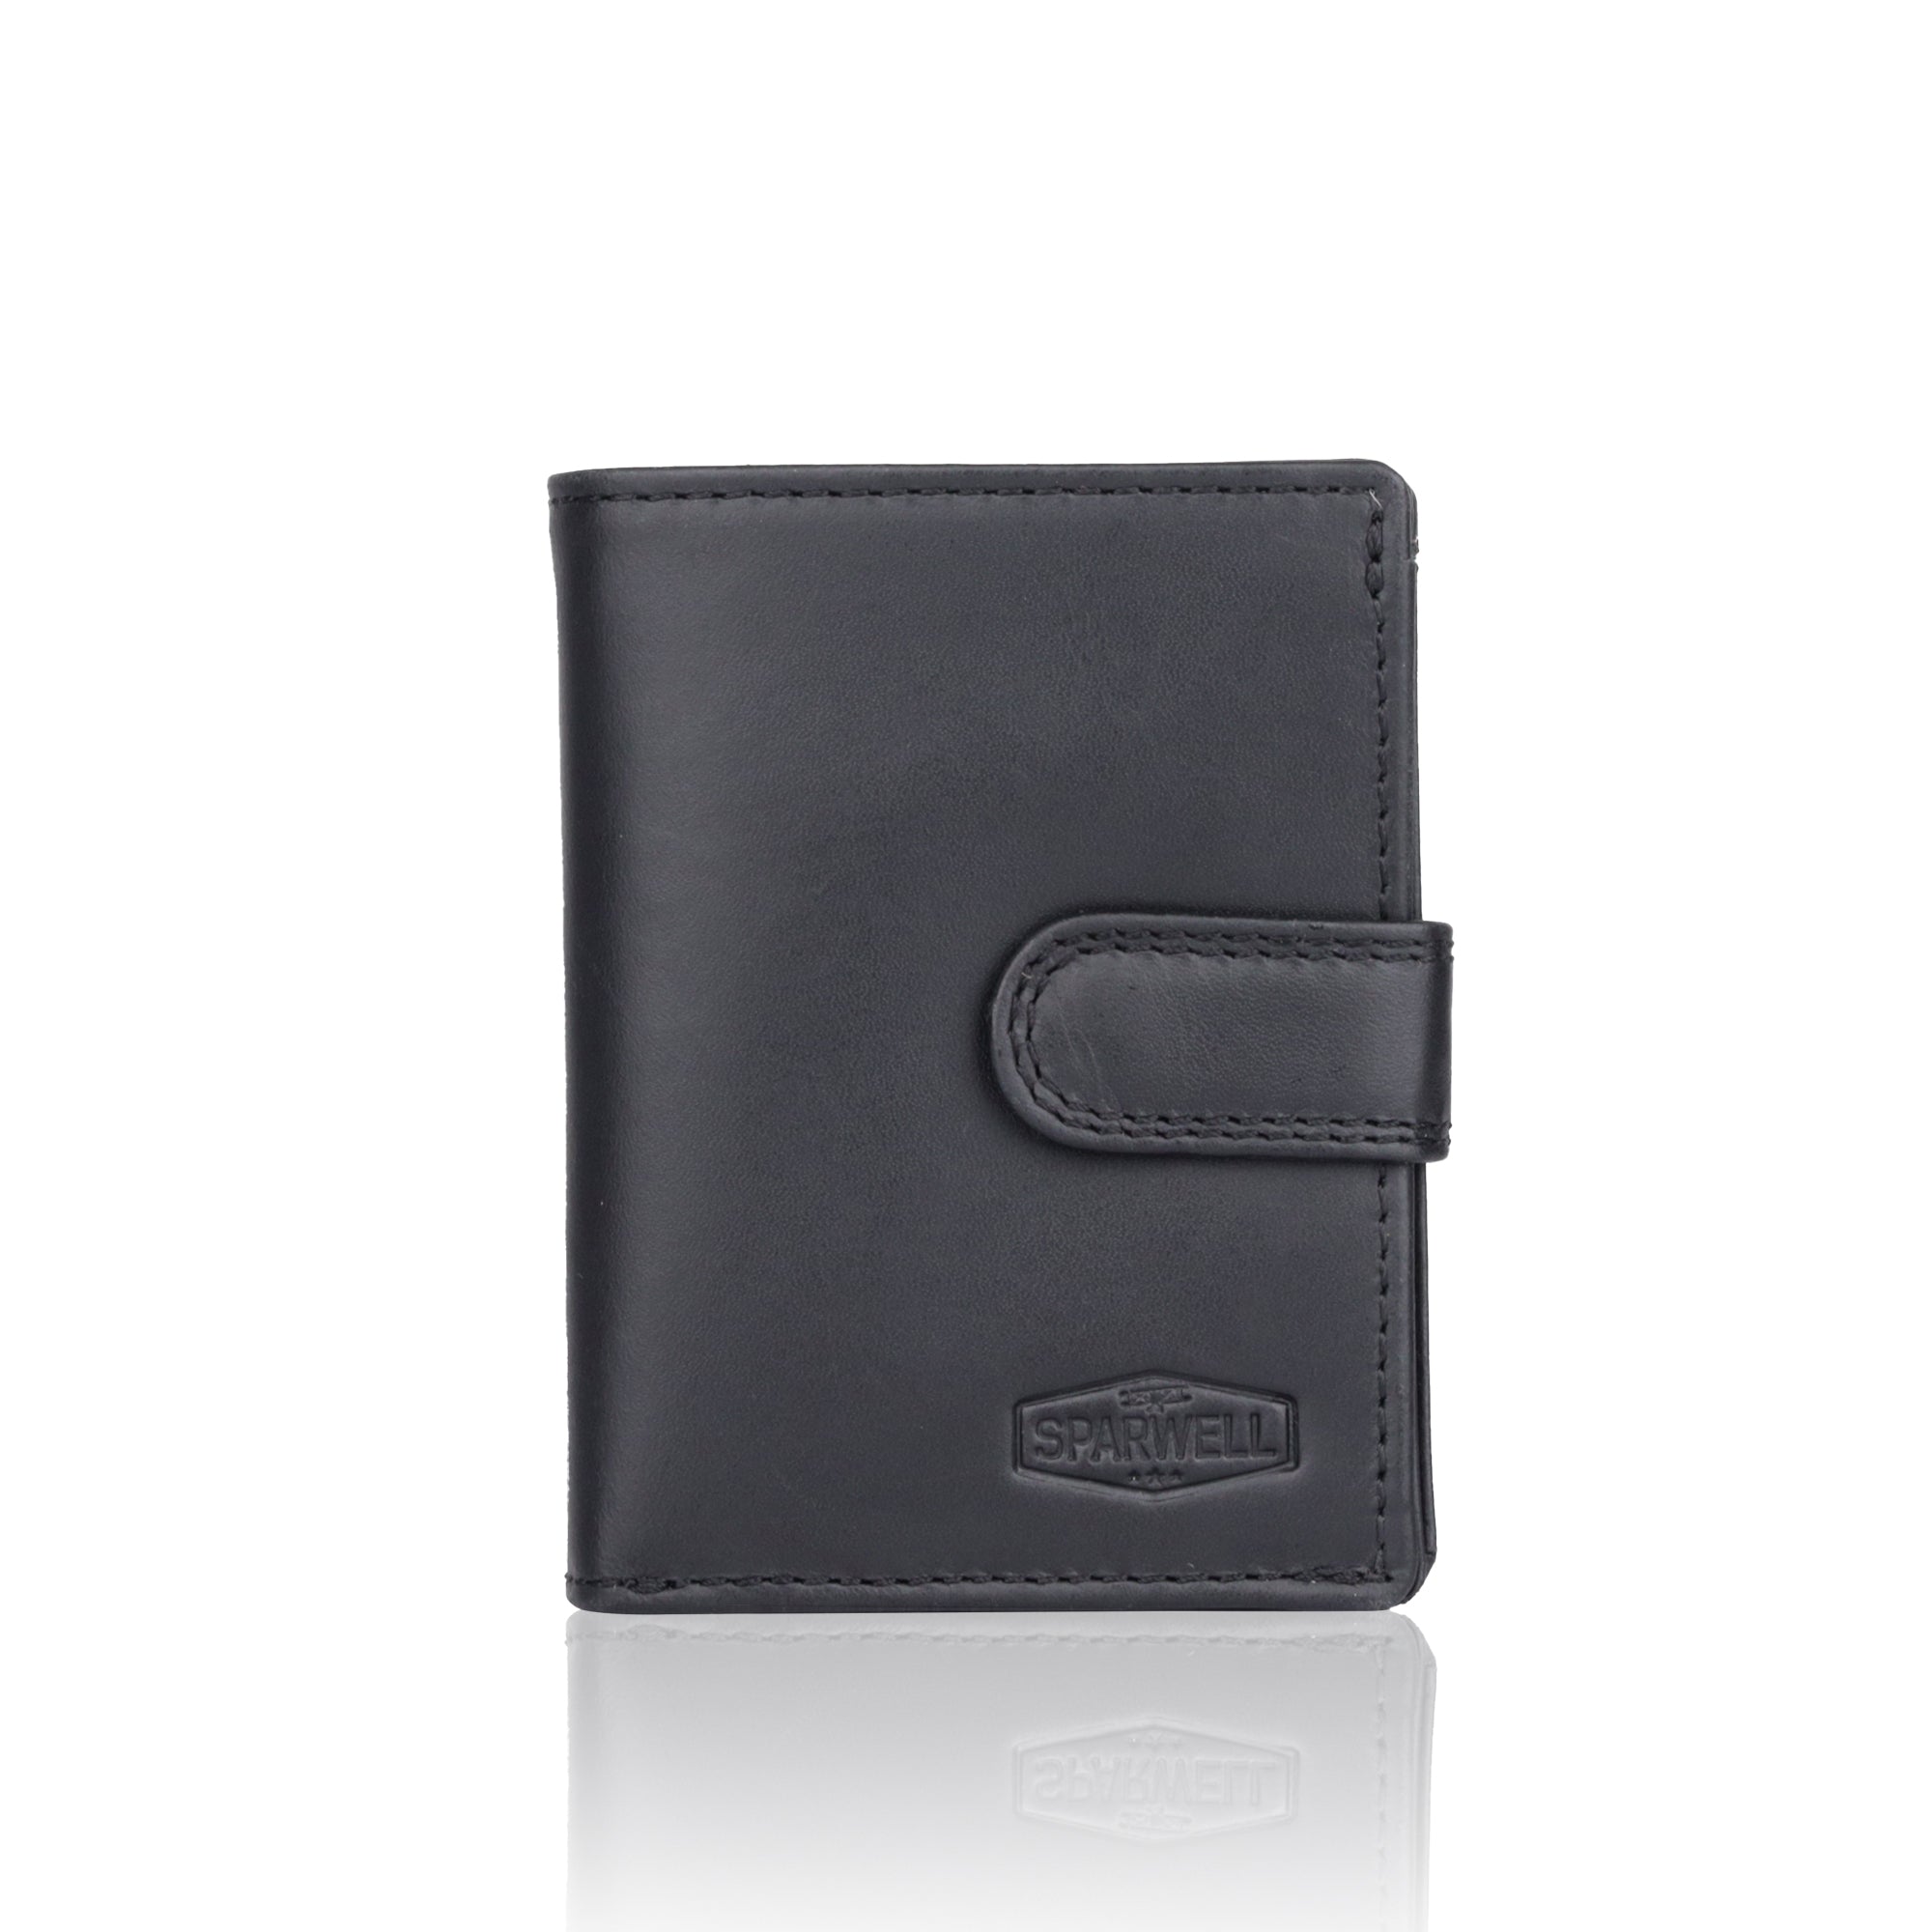 Life Changer leather card holder with hard case